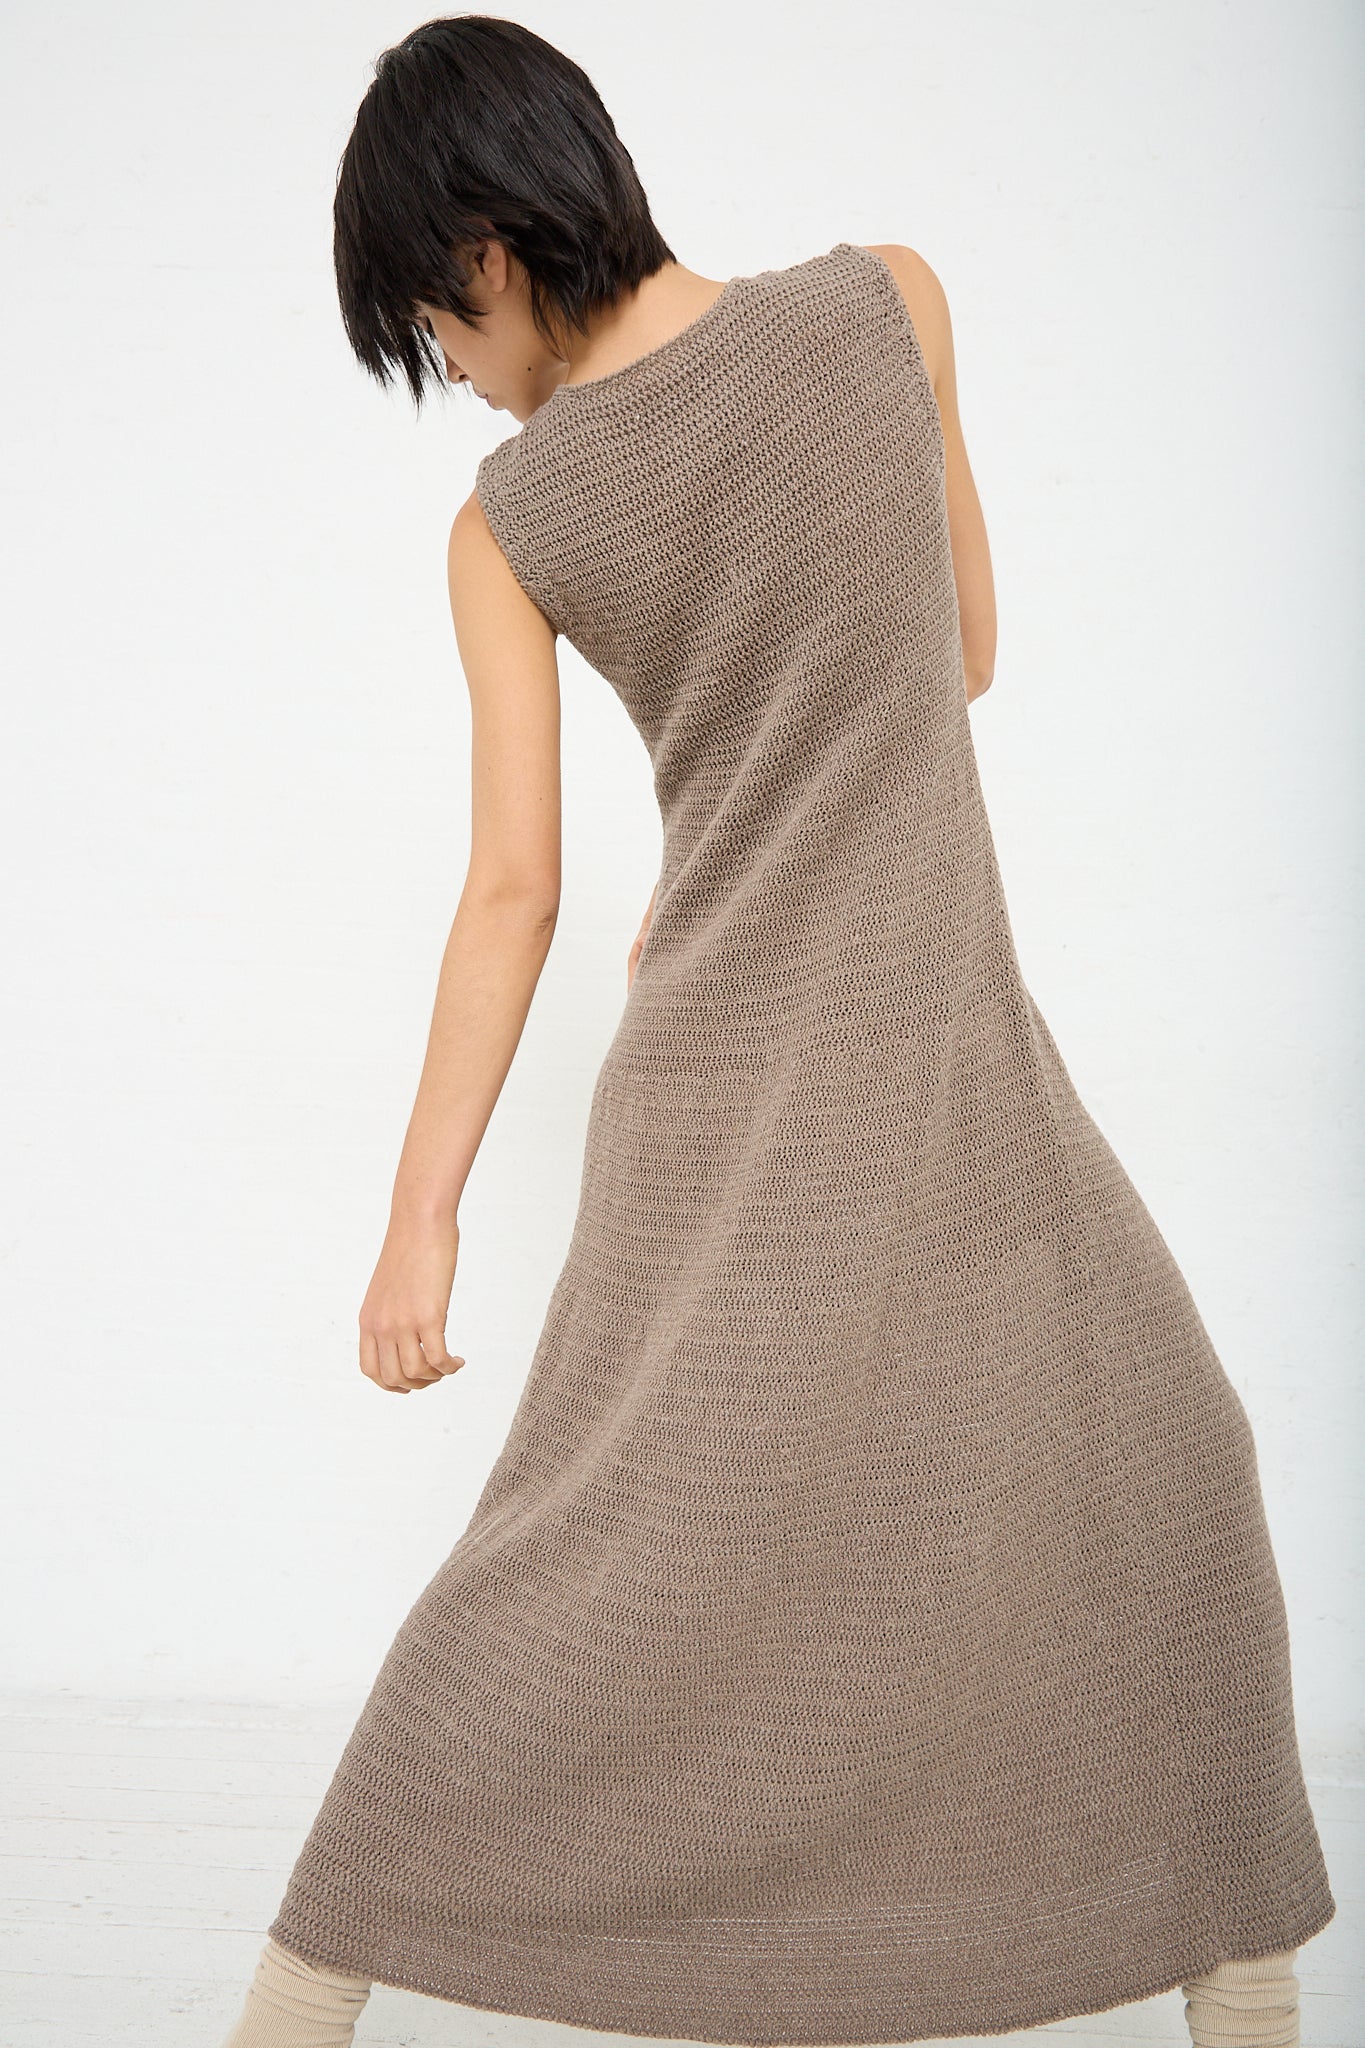 A woman wearing the Lauren Manoogian Basket Dress in Wood (Brown), a sleeveless knitted dress made of pima cotton. Back view.